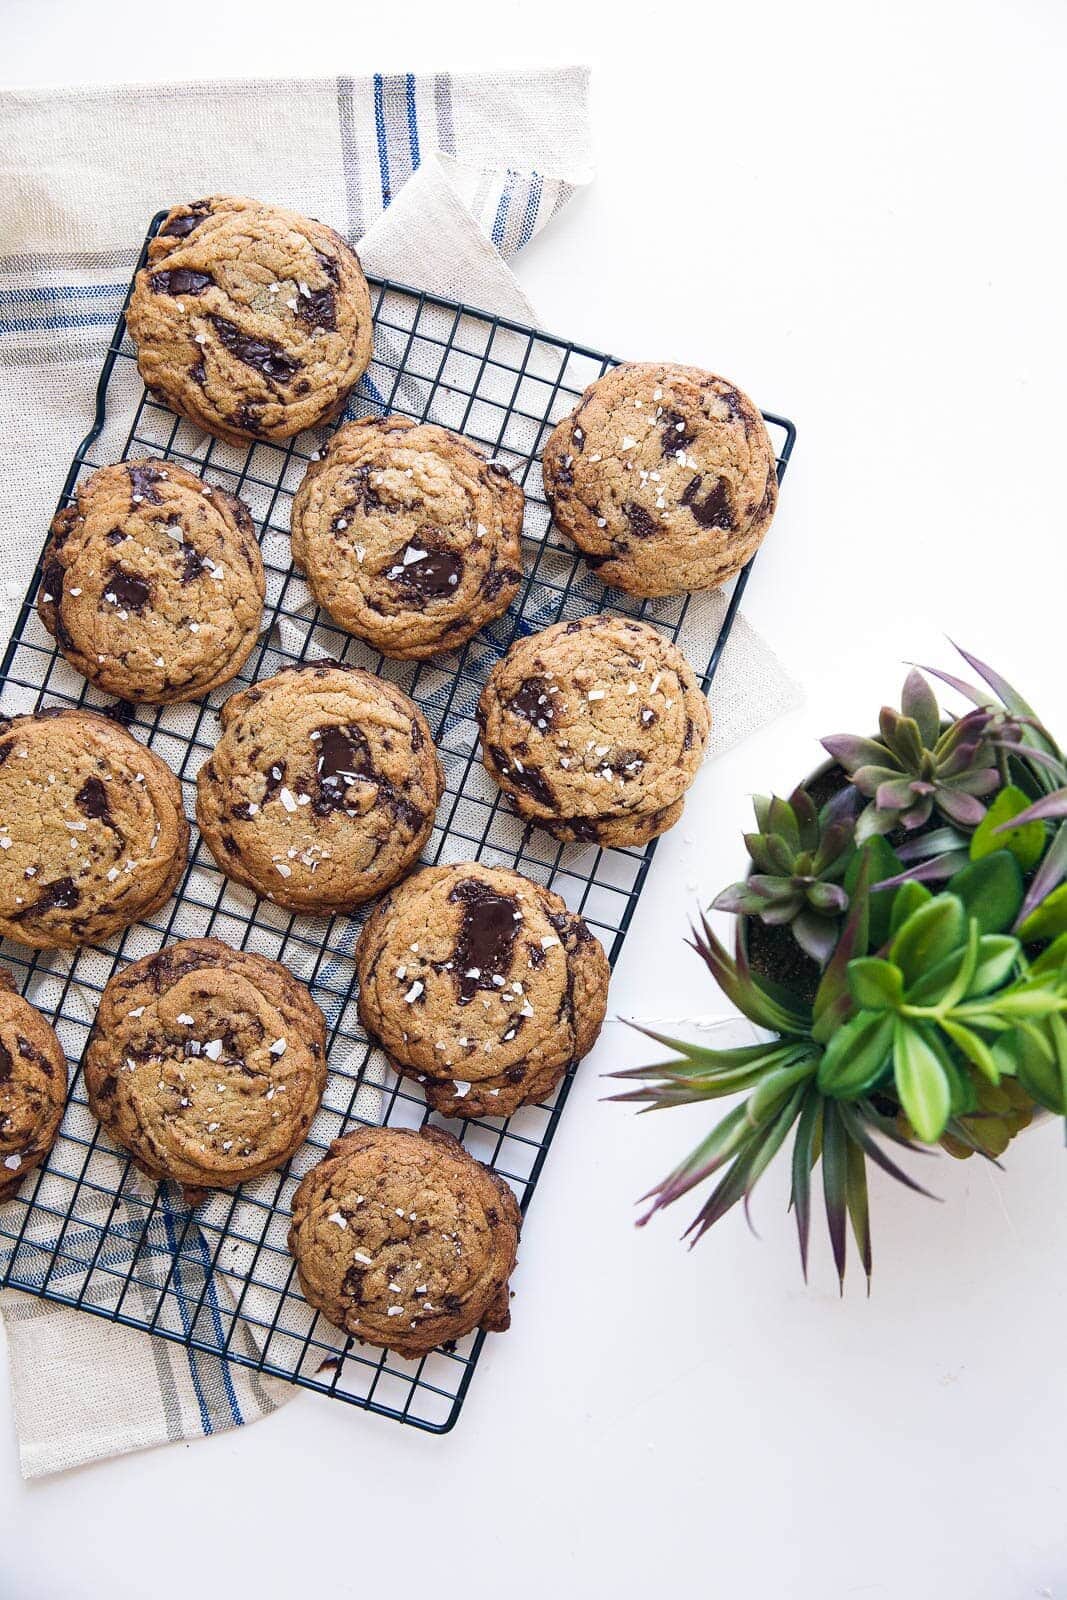 Keeping things classy with olive oil chocolate chip cookies, loaded with huge chunks of dark chocolate and sea salt!